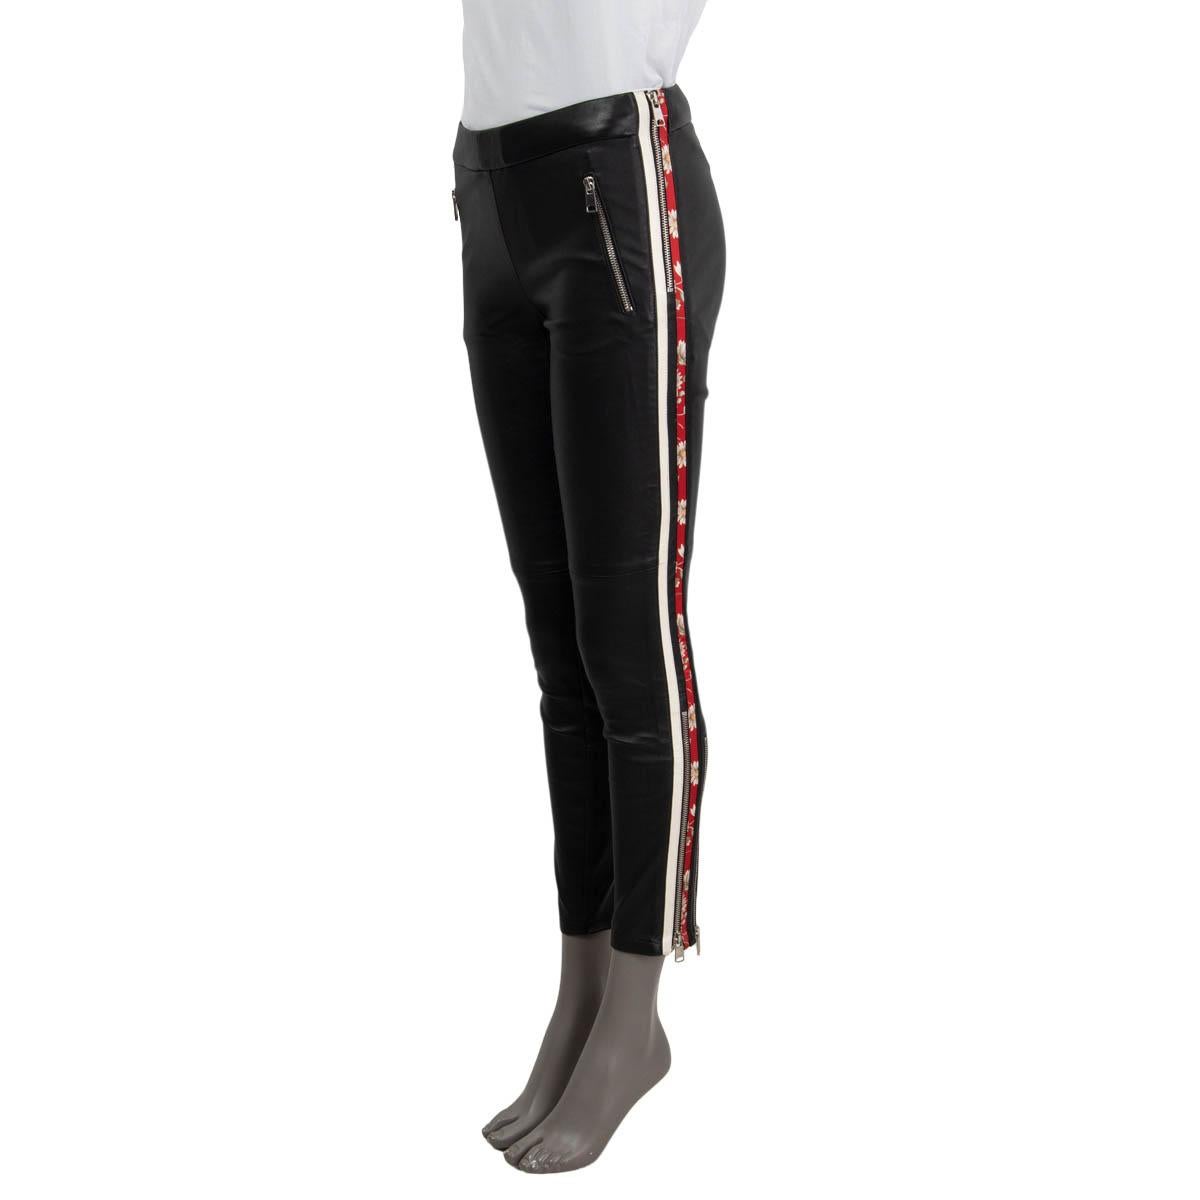 100% authentic Alexander McQueen floral-striped stretchy skinny pants in black lambskin (100%) with black lining in cotton (97%) and elastane (3%). Silver-tone zipper details on the calf and two front zip pockets. Red, white and green floral printed